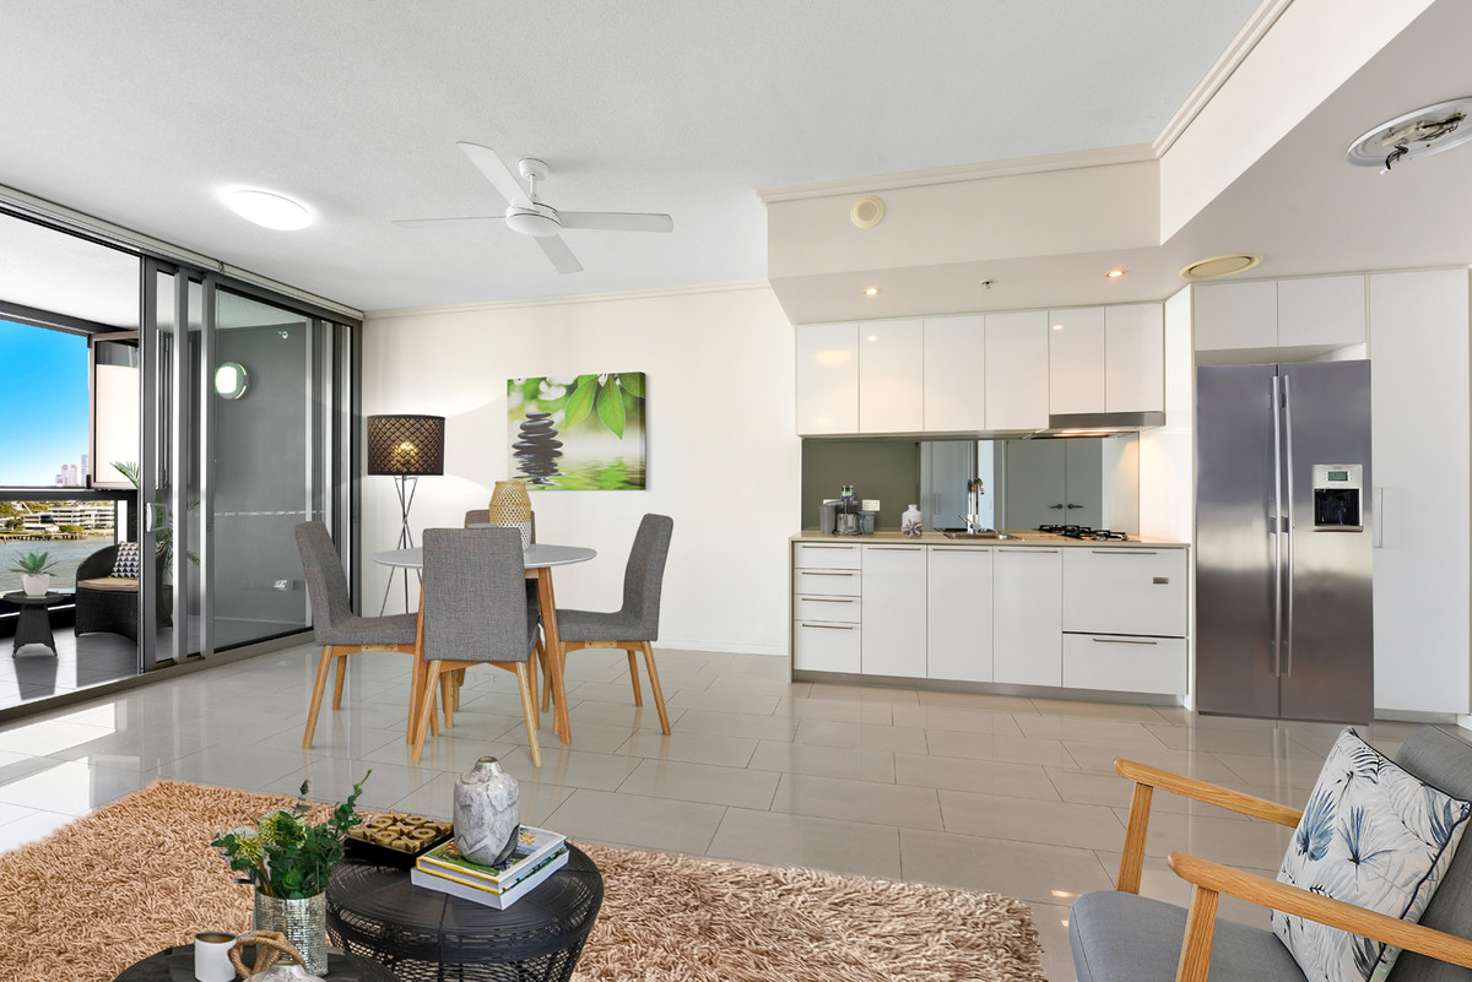 Main view of Homely apartment listing, 20709/8 Hercules Street, Hamilton QLD 4007